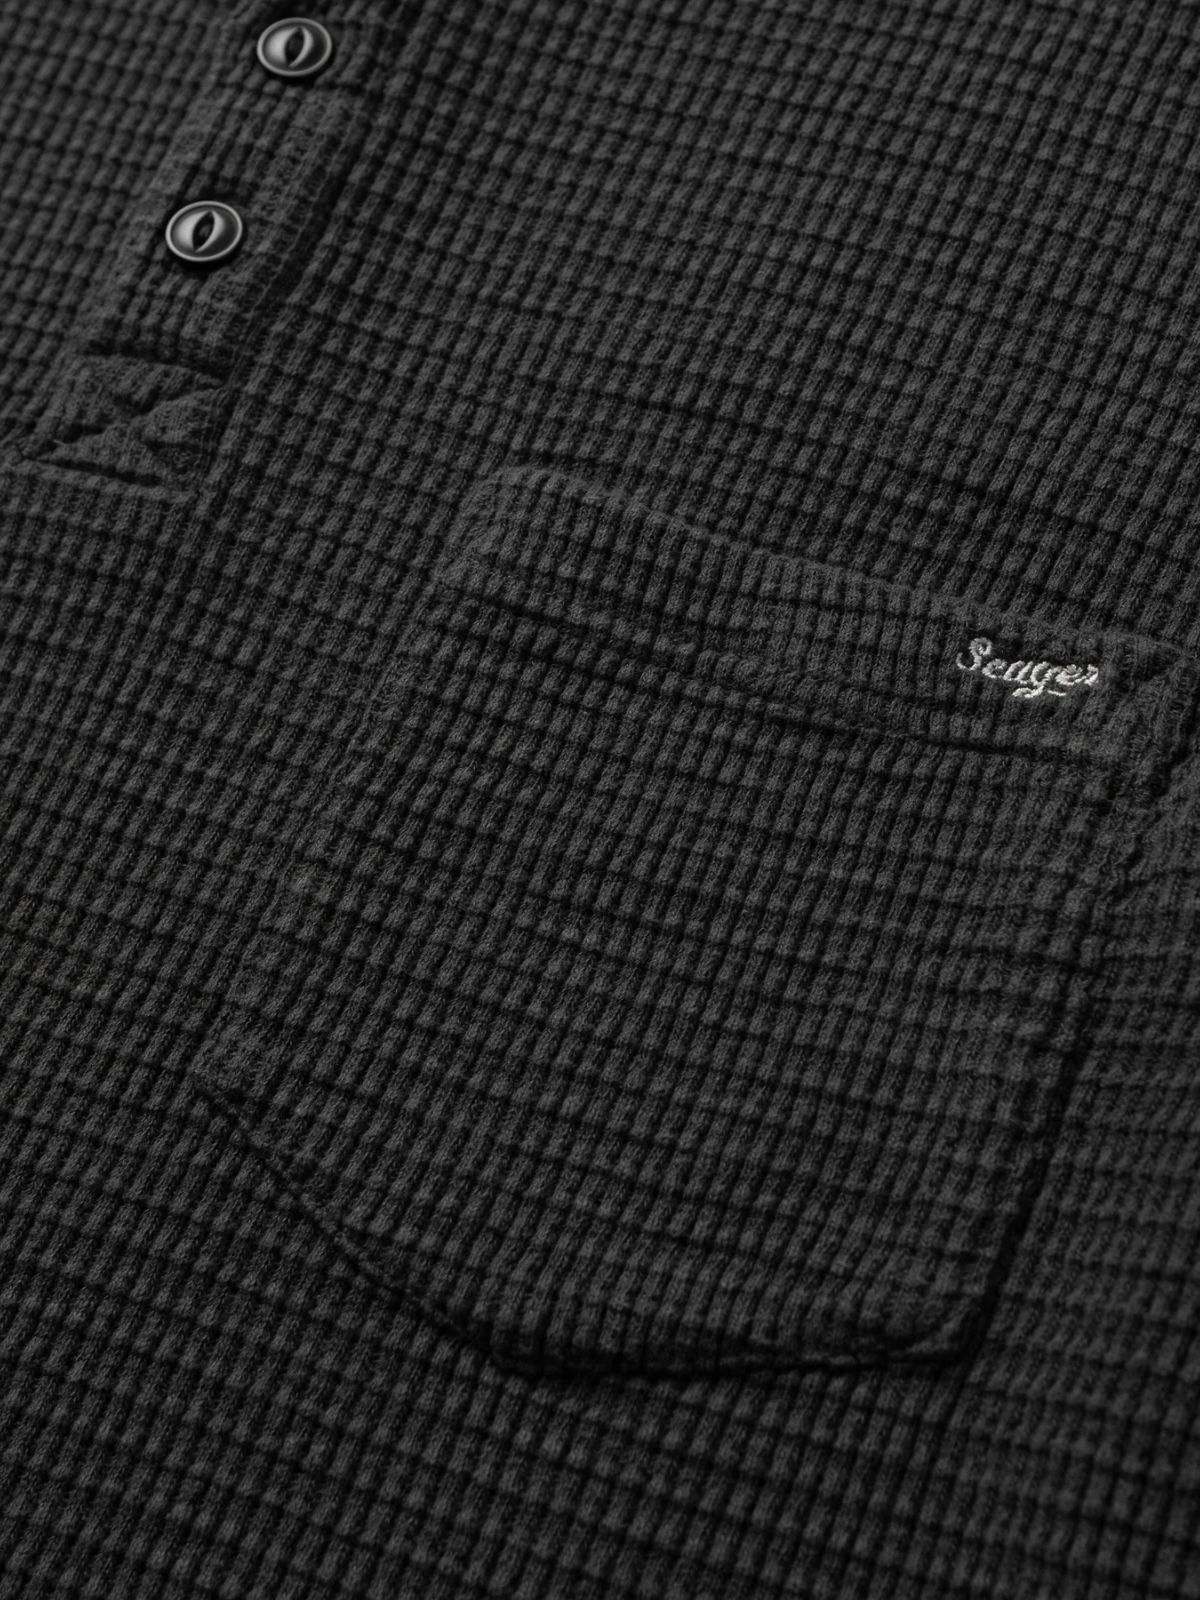 seager sawpit henley vintage black white brand embroidery on pocket waffle knit thermal ls long sleeve shirt kempt athens ga georgia men's clothing store